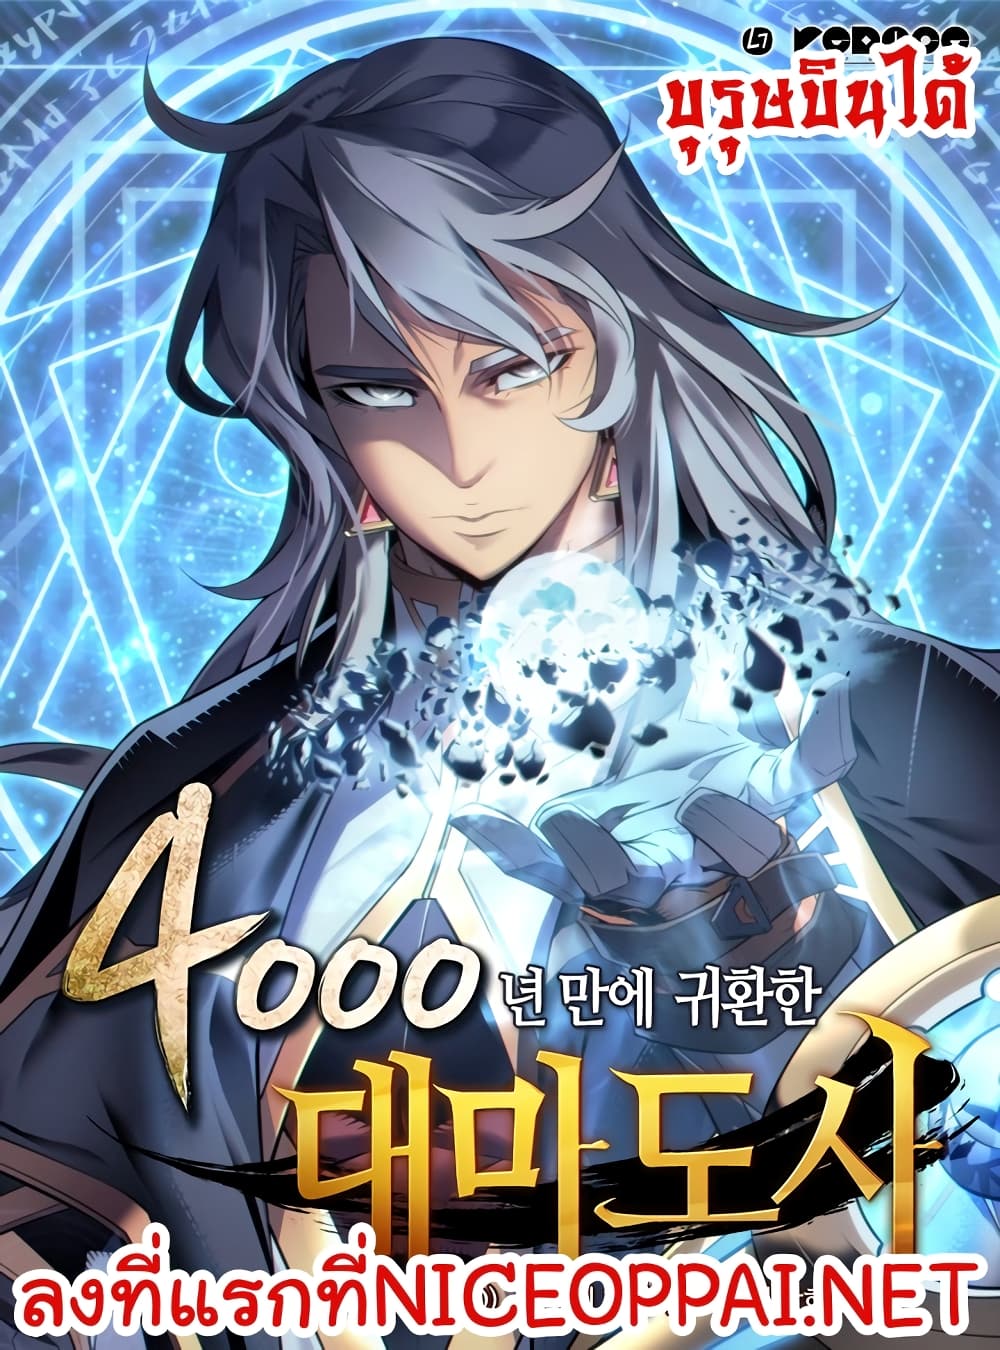 The Great Mage Returns After 4000 Years 33 (1)